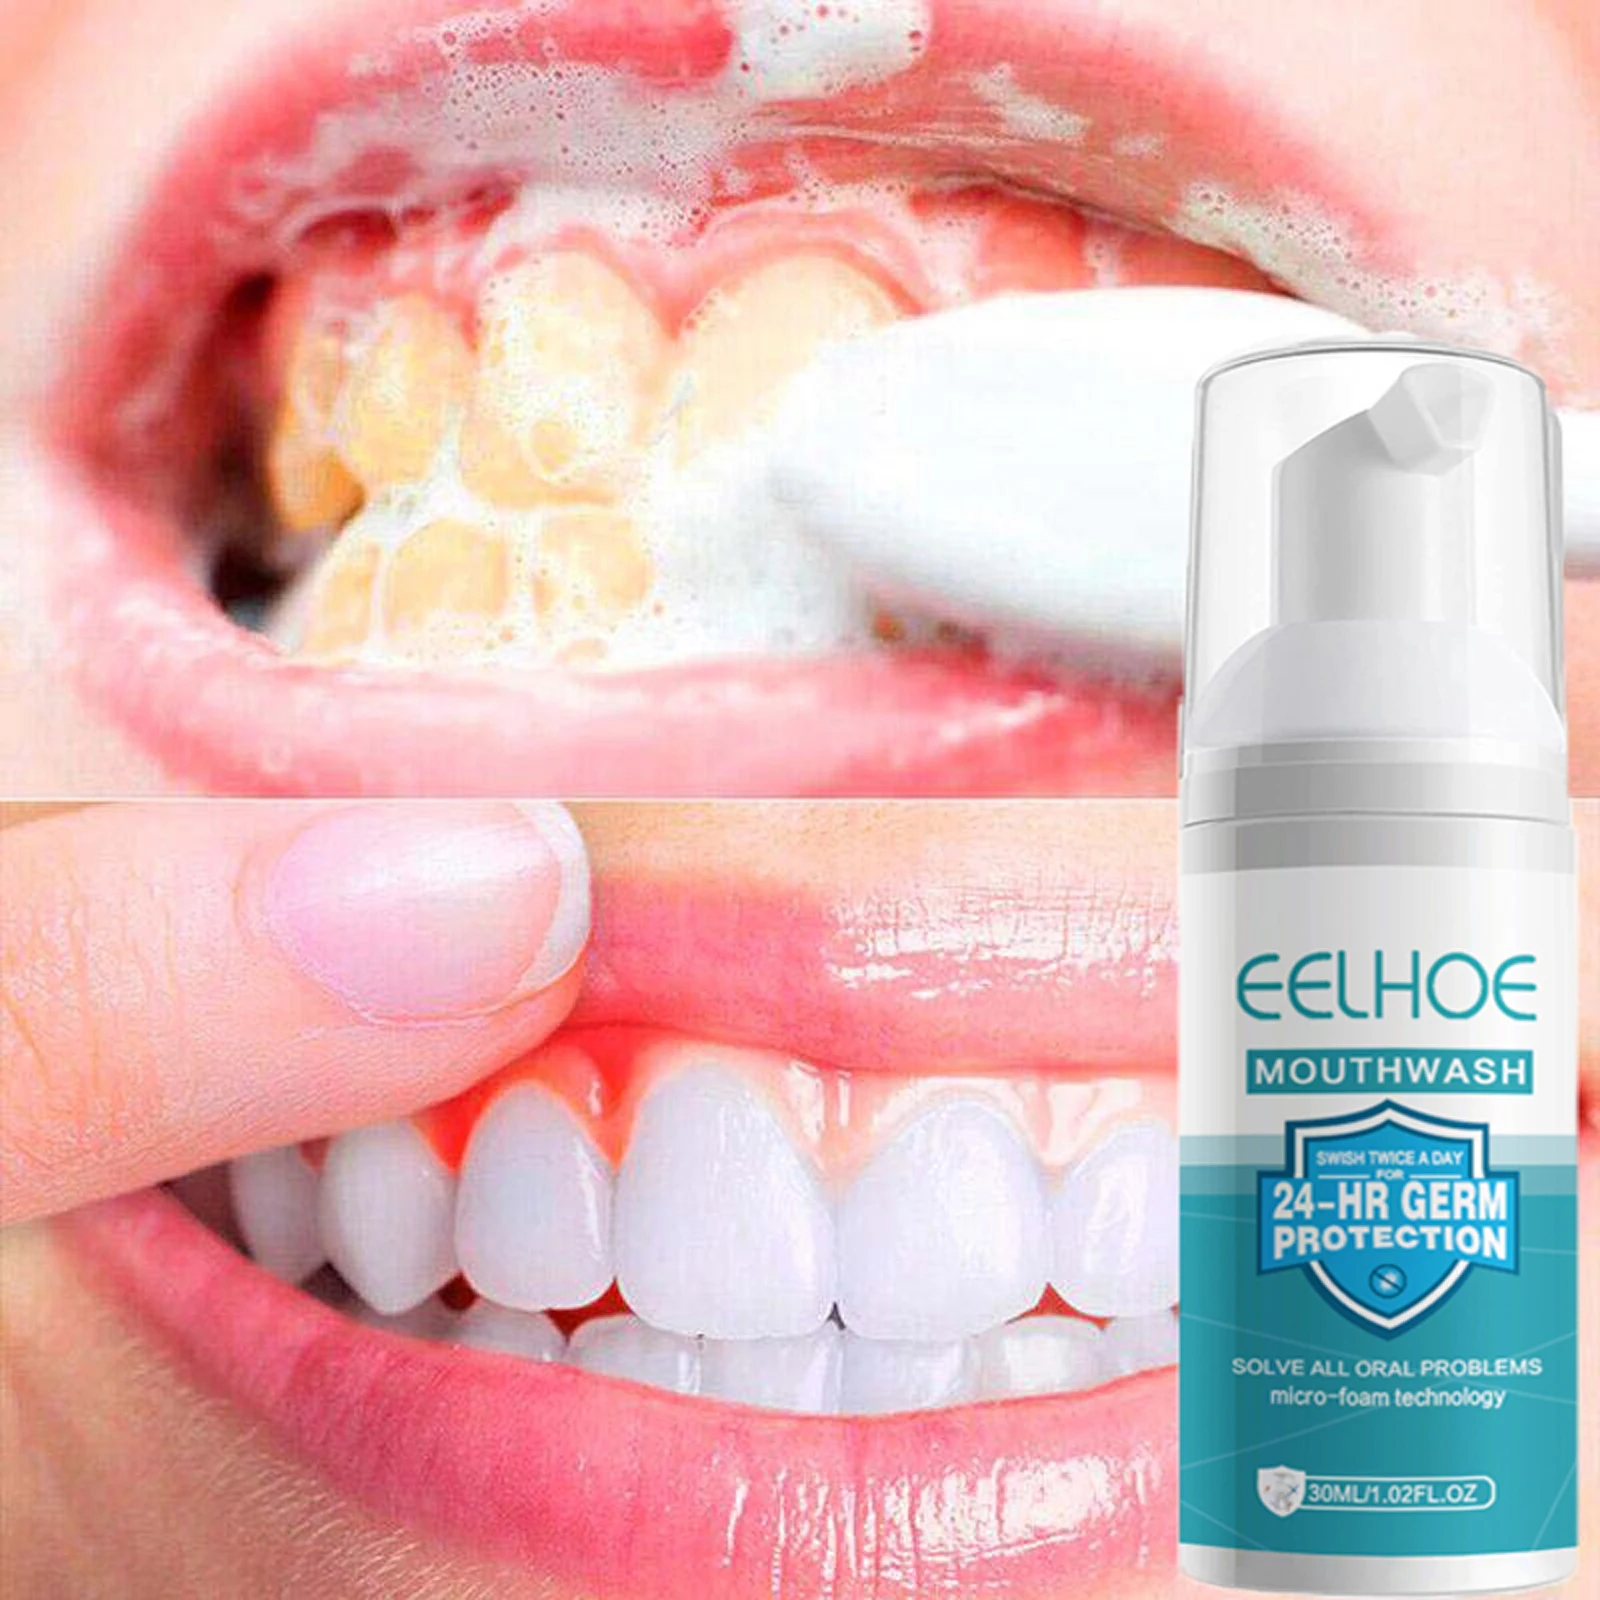 Teeth Whitening Mousse Toothpaste Remove Plaque Stains Cleansing Oral Hygiene Bleaching Teeth Fresh Breath Dentistry Beauty Care